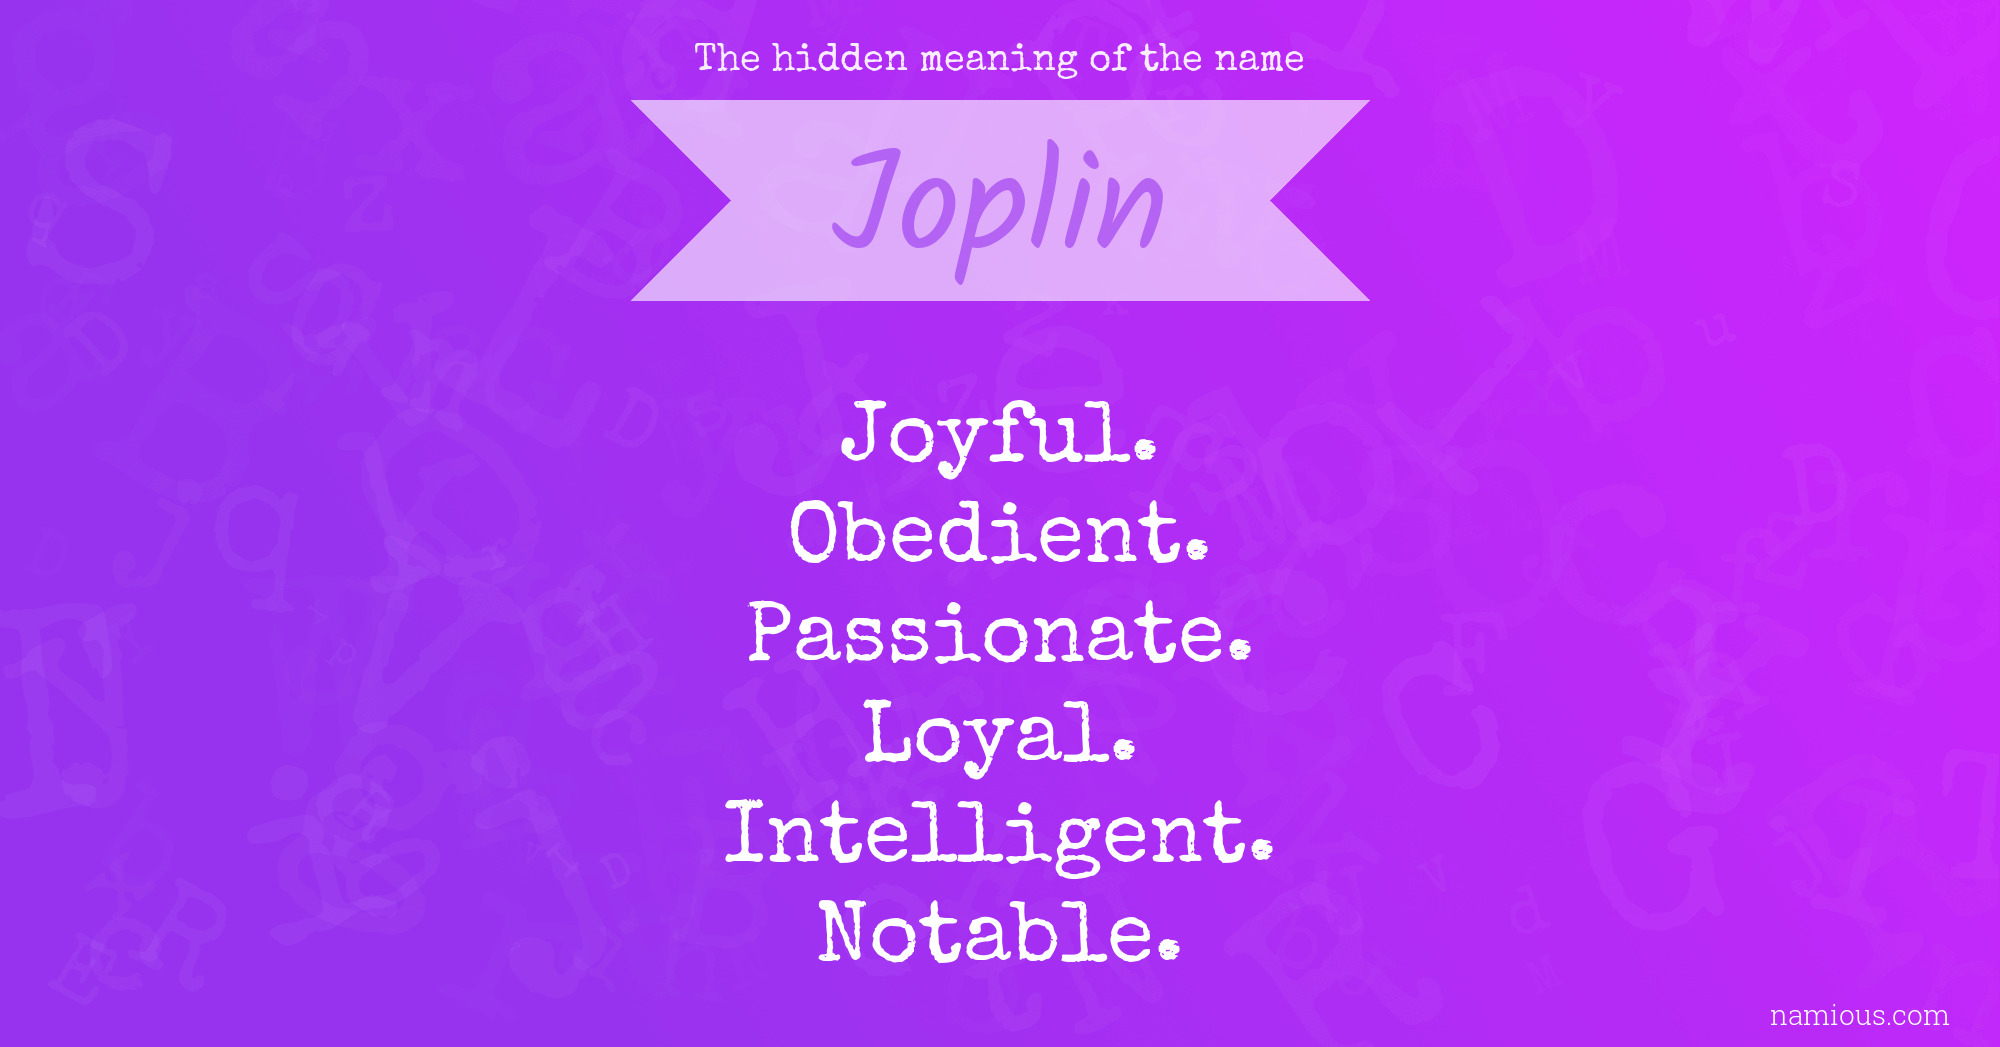 The hidden meaning of the name Joplin